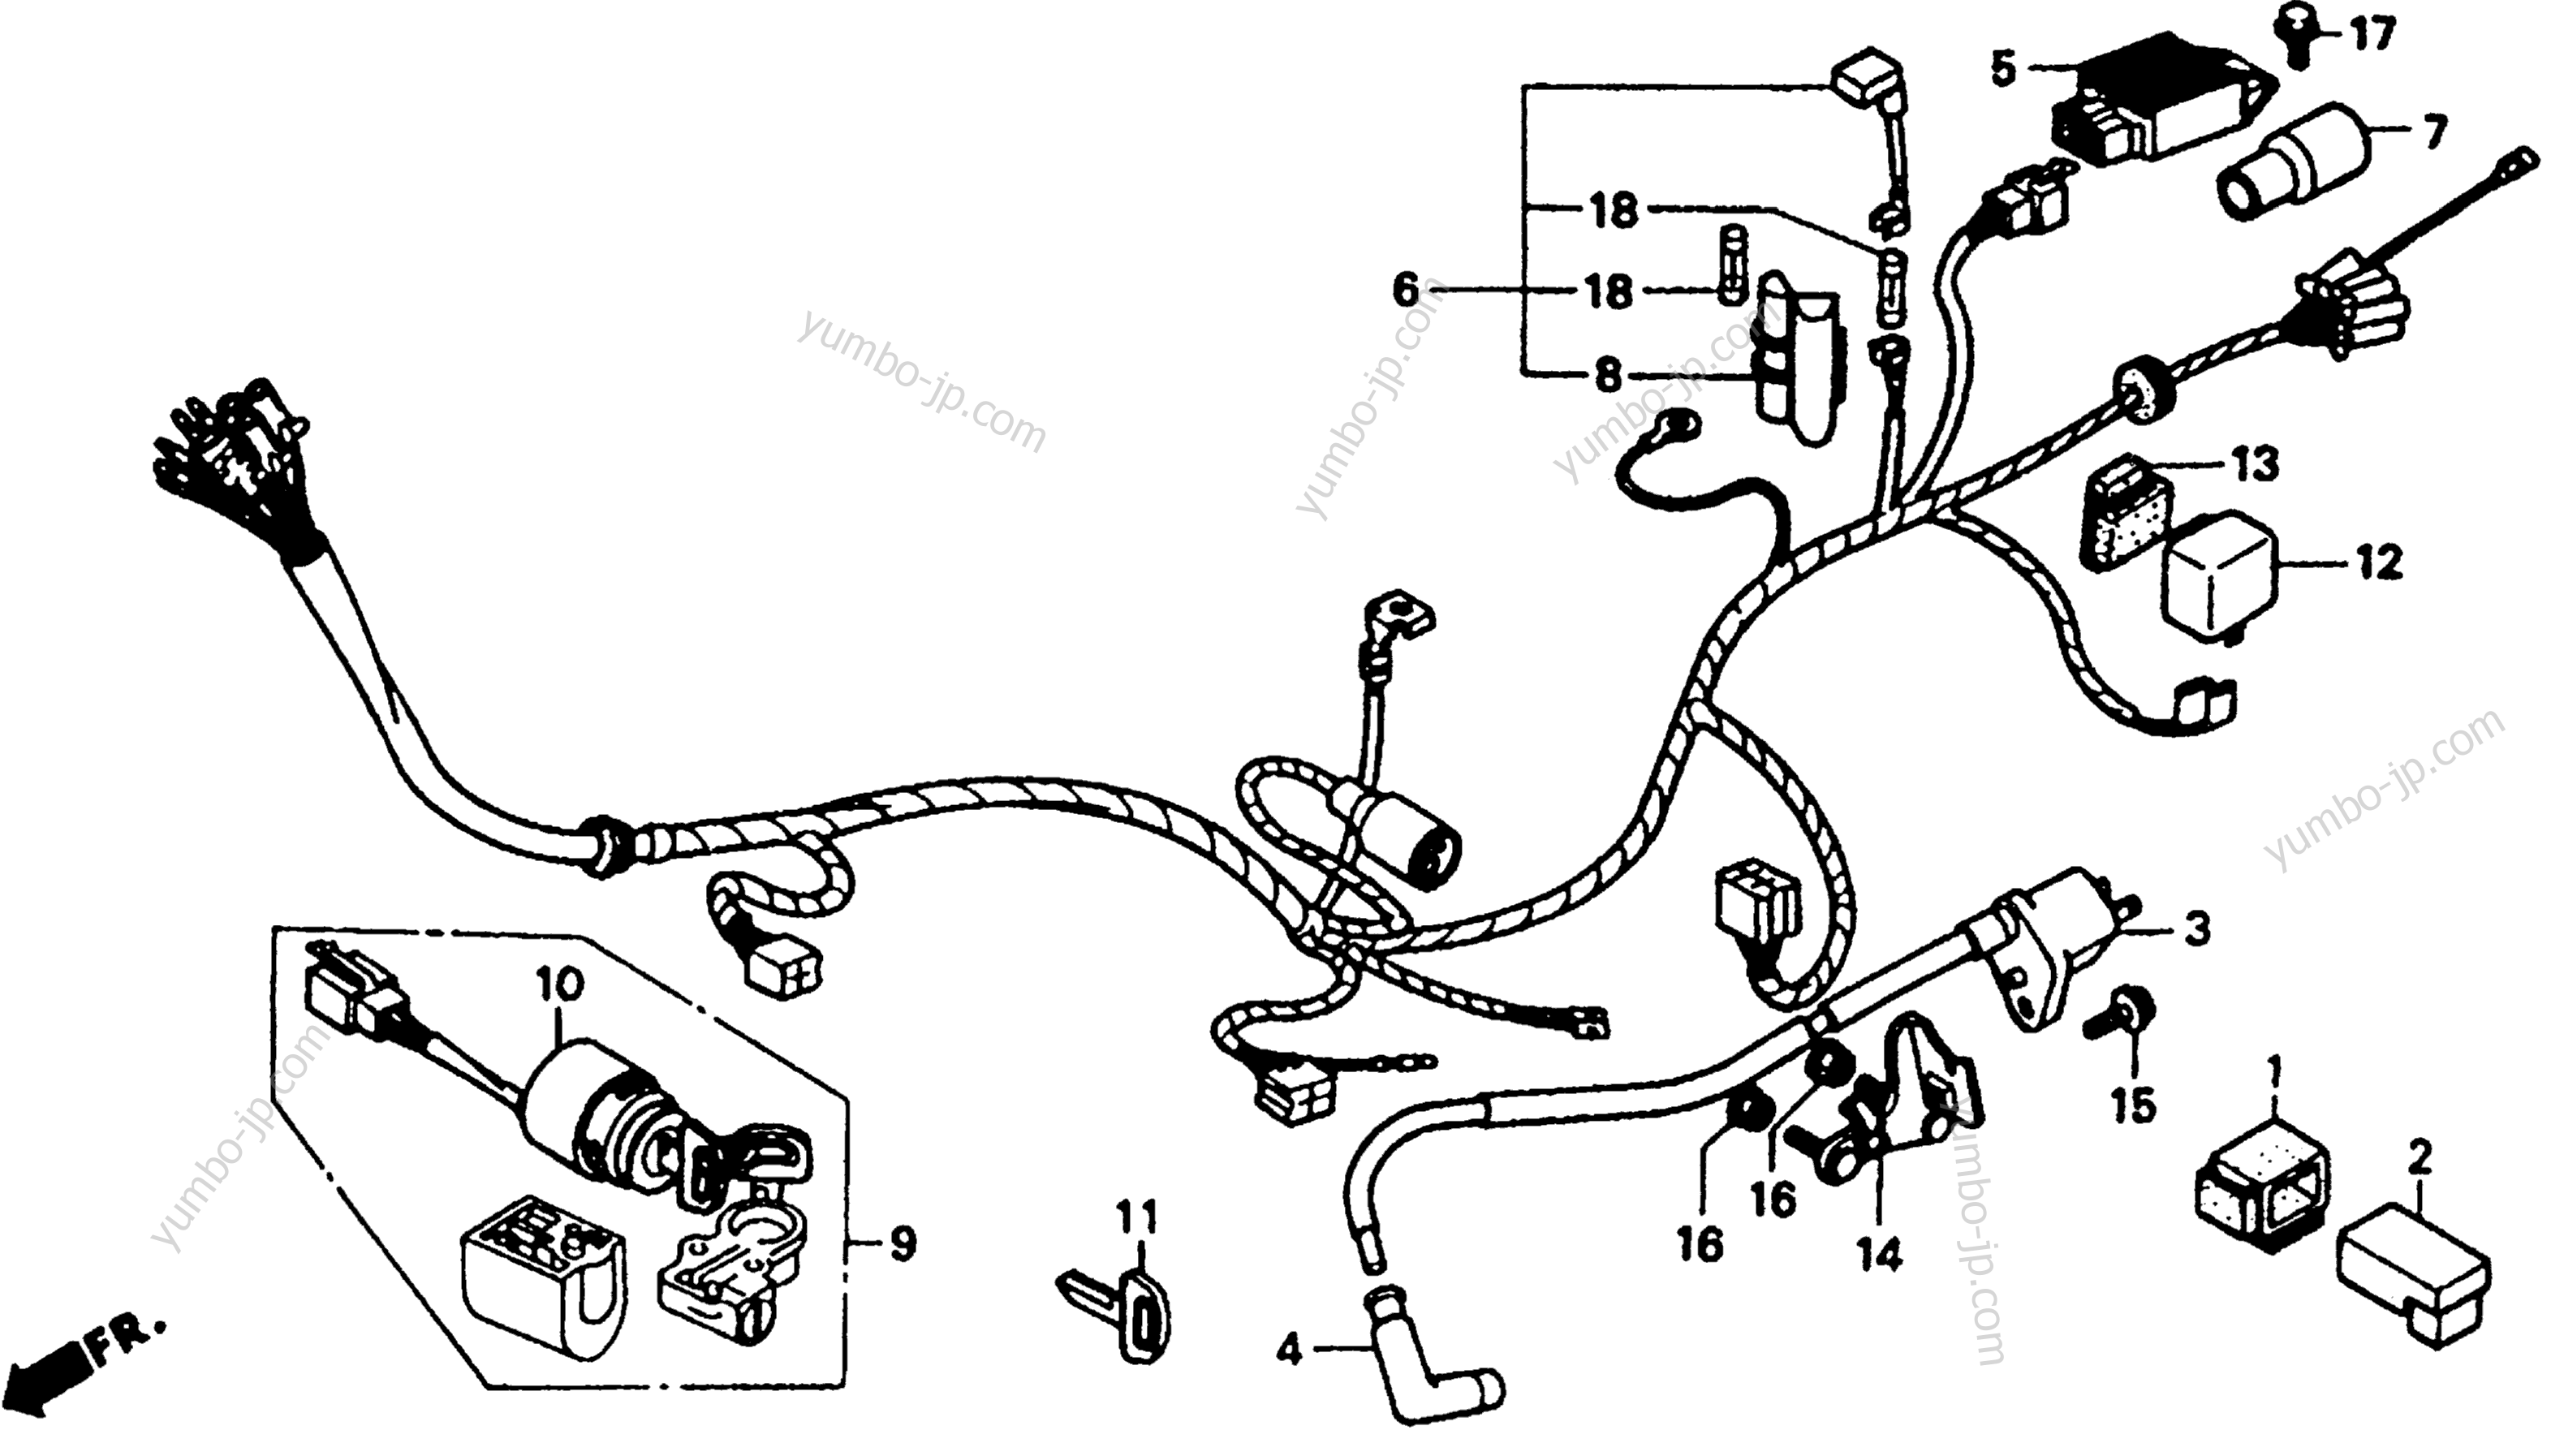 WIRE HARNESS for motorcycles HONDA CT70 A 1991 year